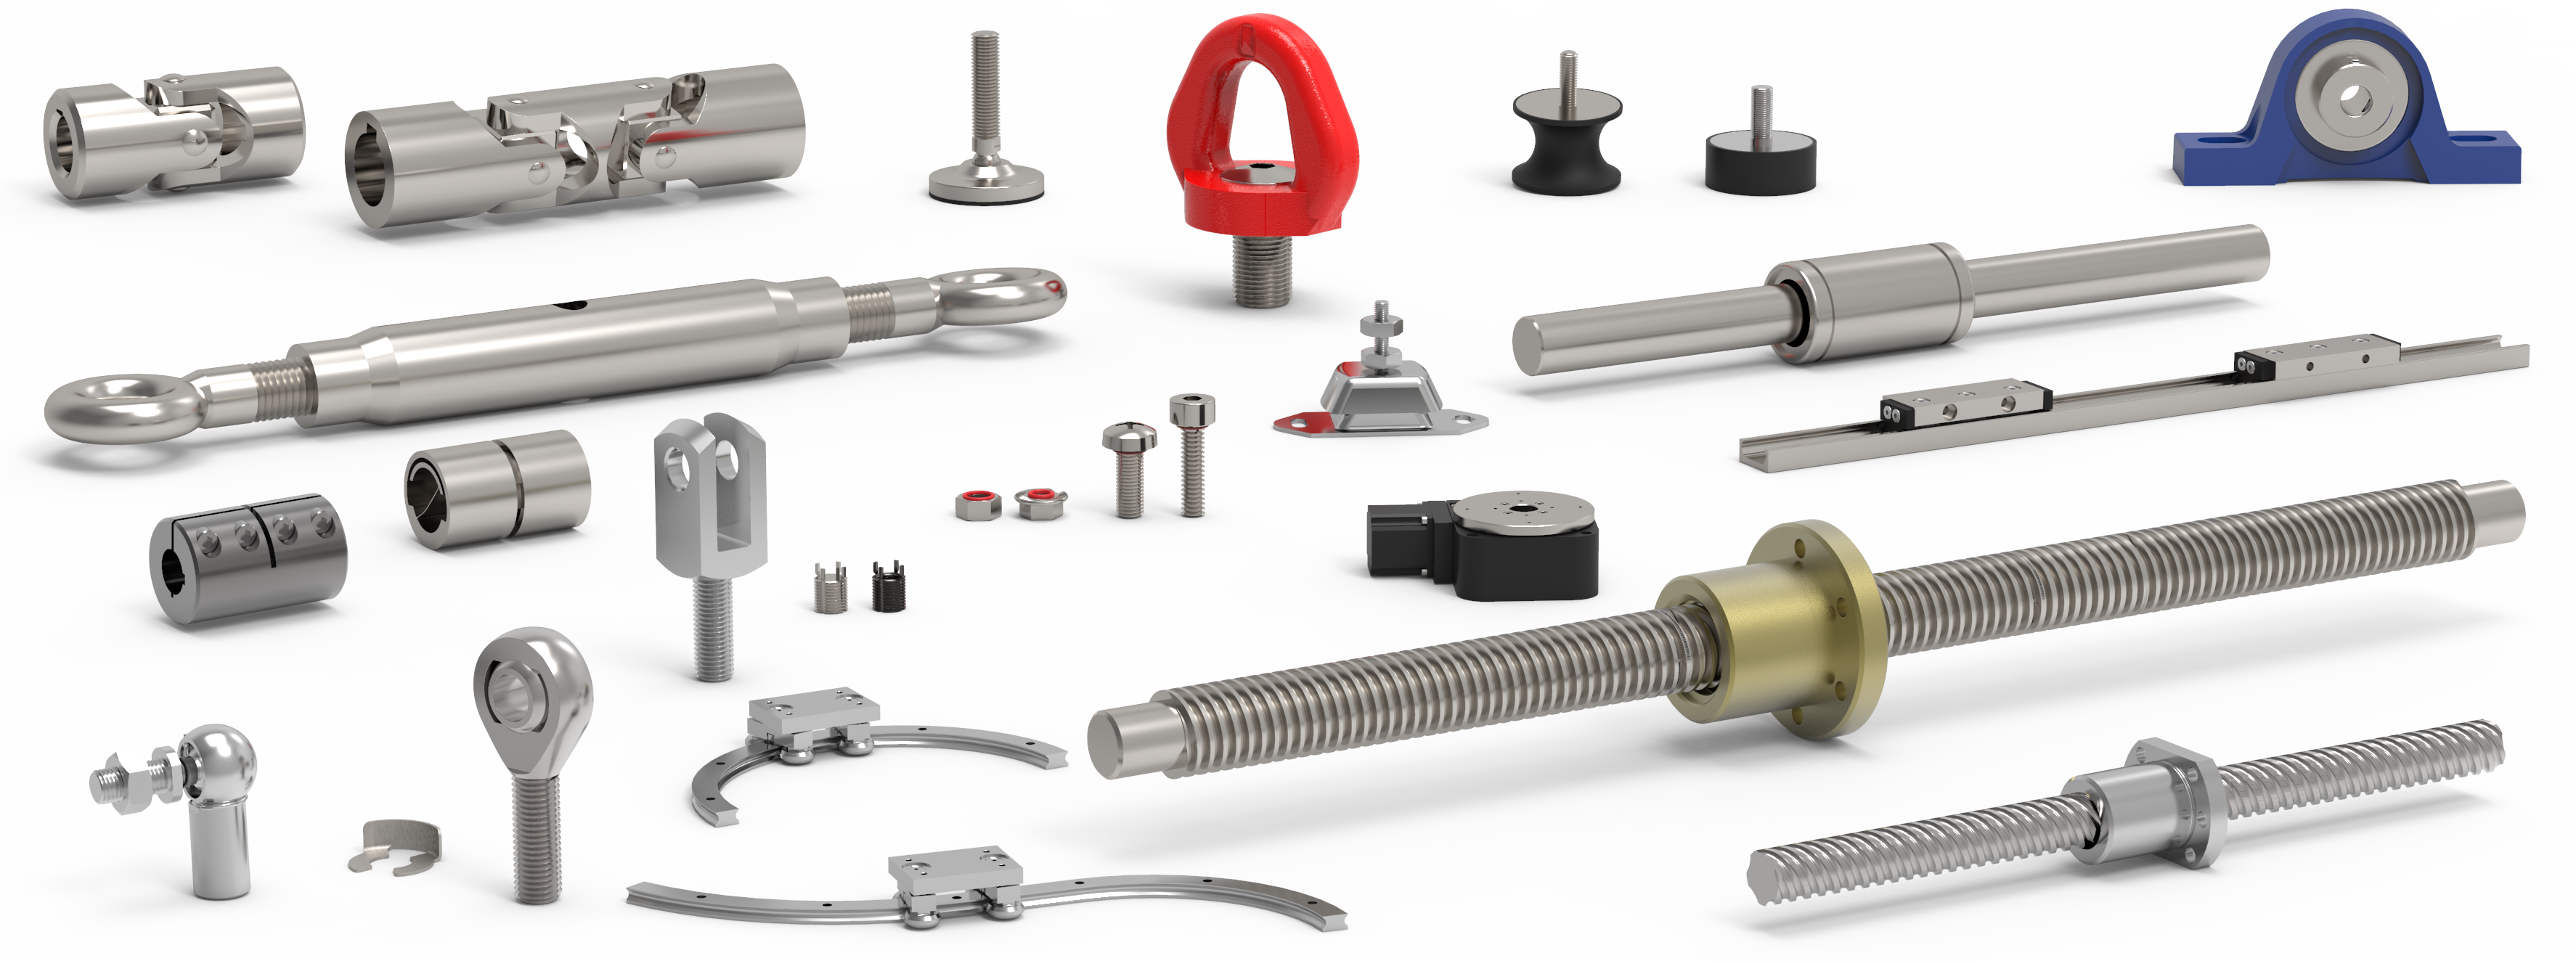 Slotted Set Screws From Automotion